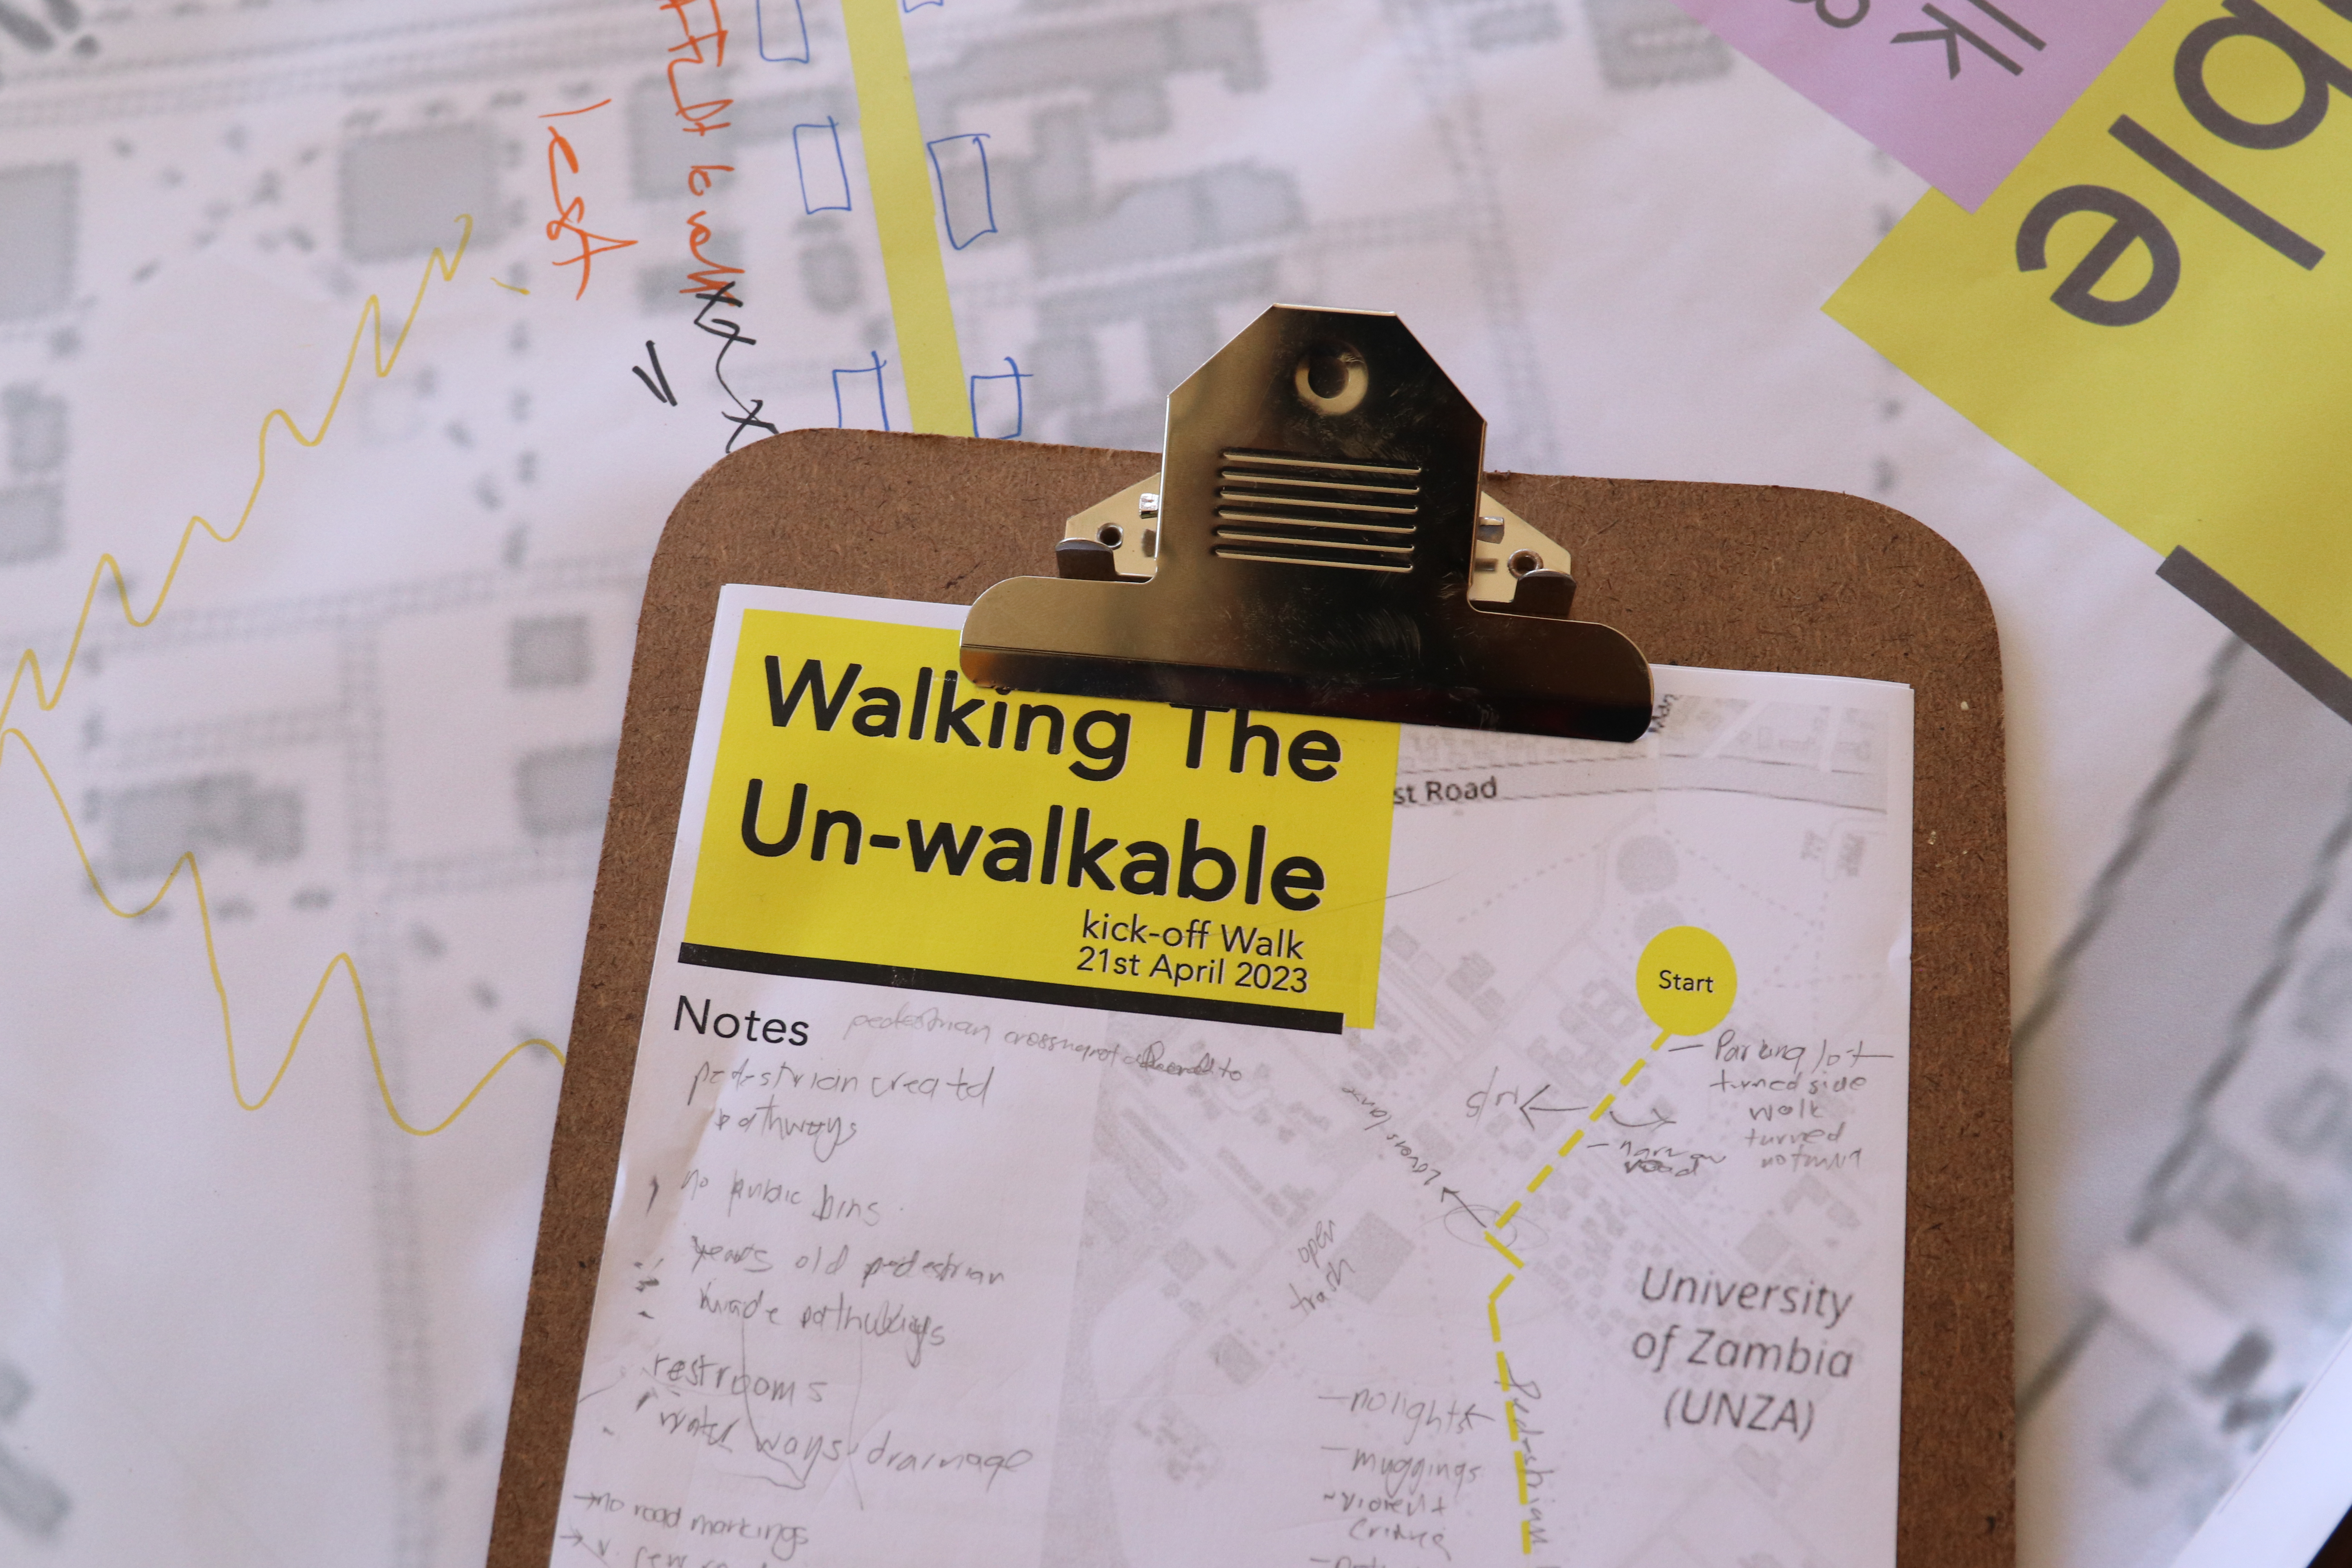 An image of a clipboard that reads "Walking the Unwalkable"